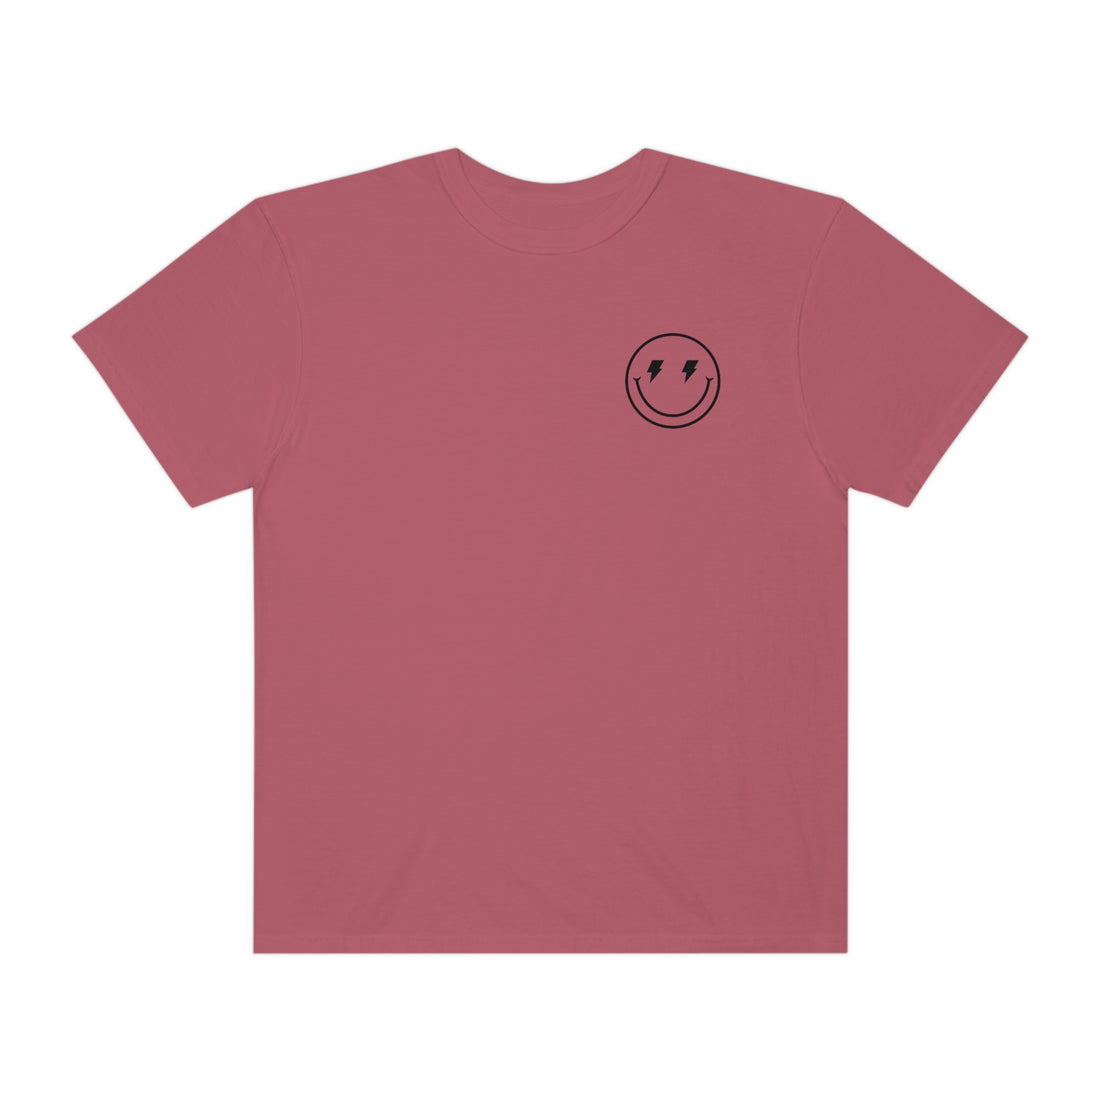 Read Smut and Chill Tee